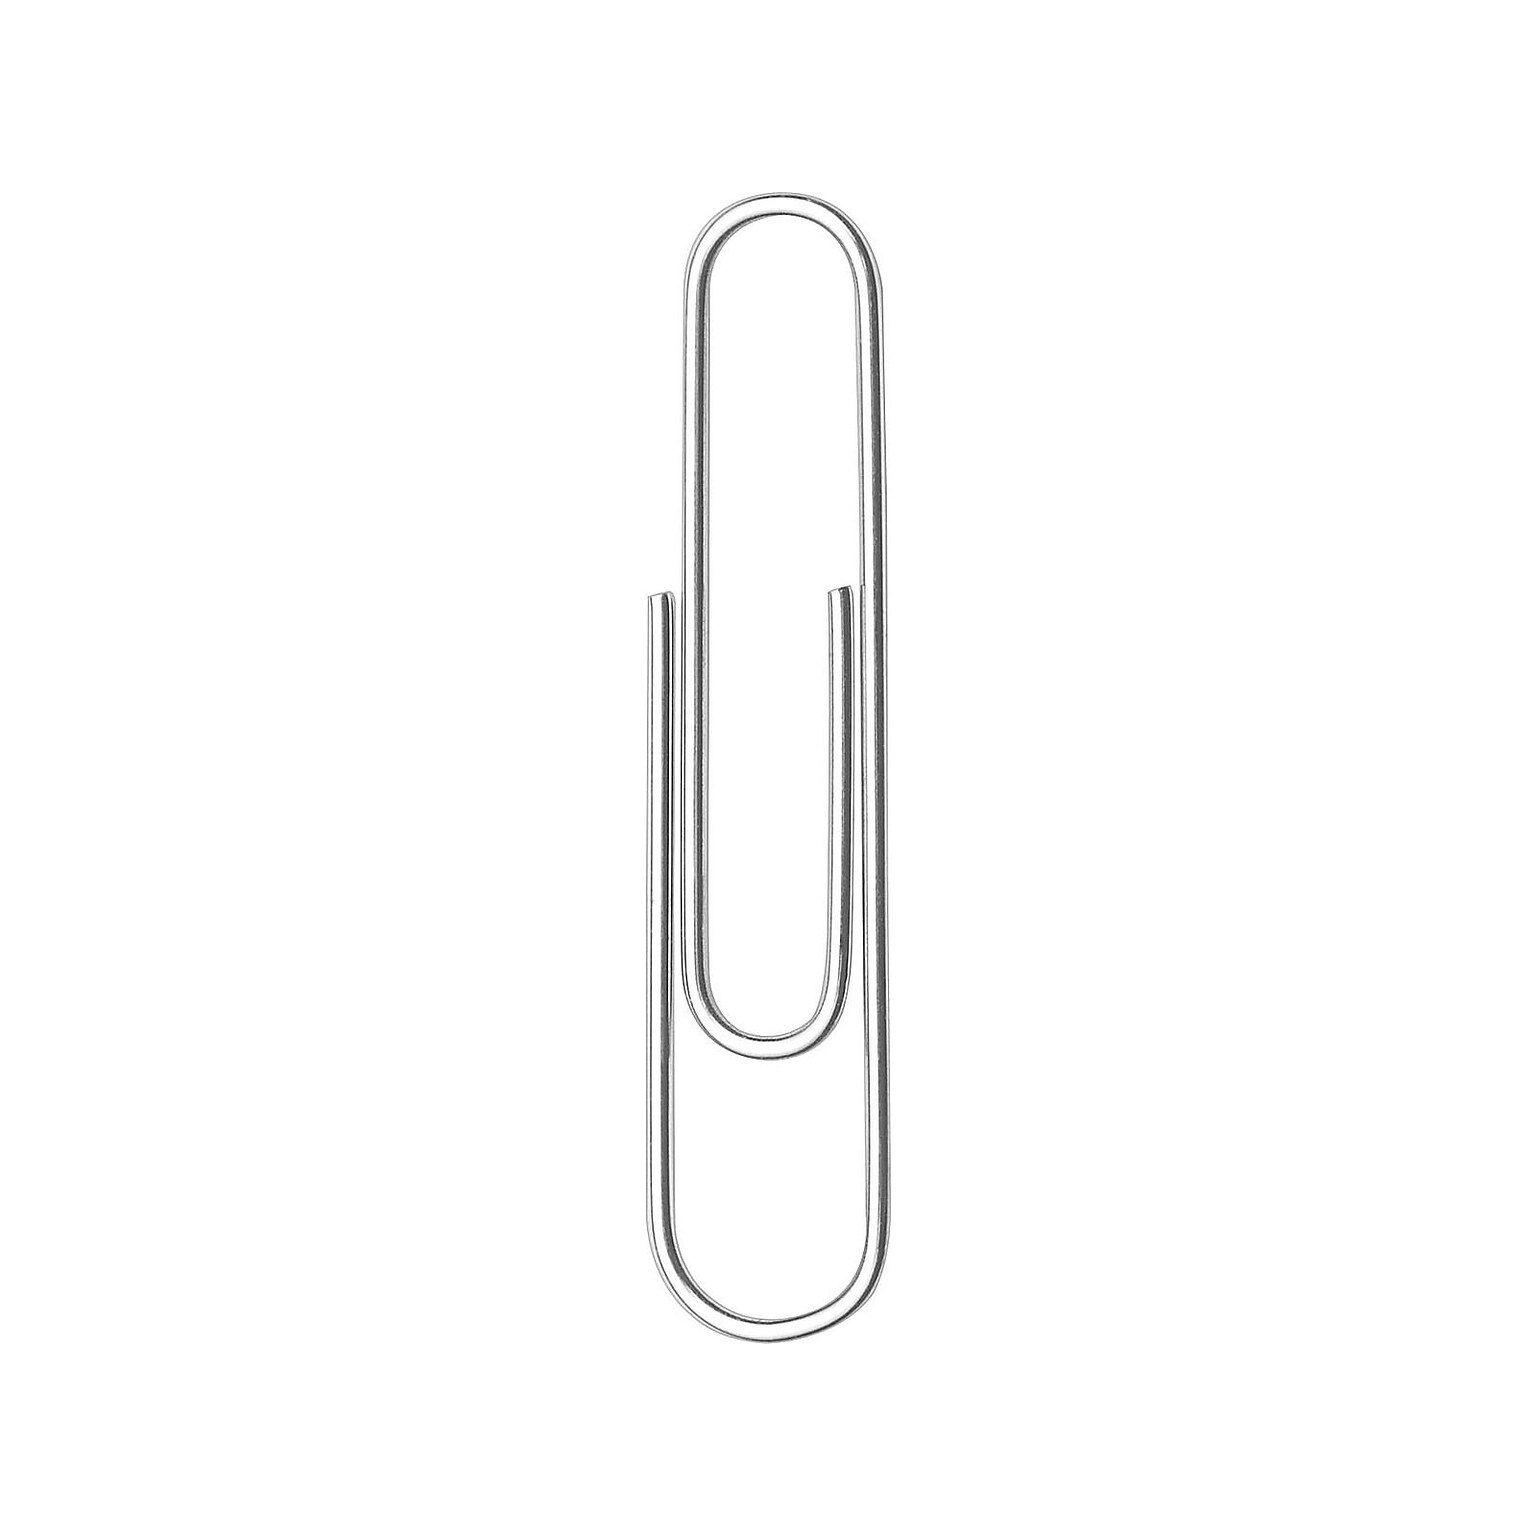 ACCO Recycled Paper Clips, #1, Silver, 100/Box, 10 Boxes/Pack (A7072365A)